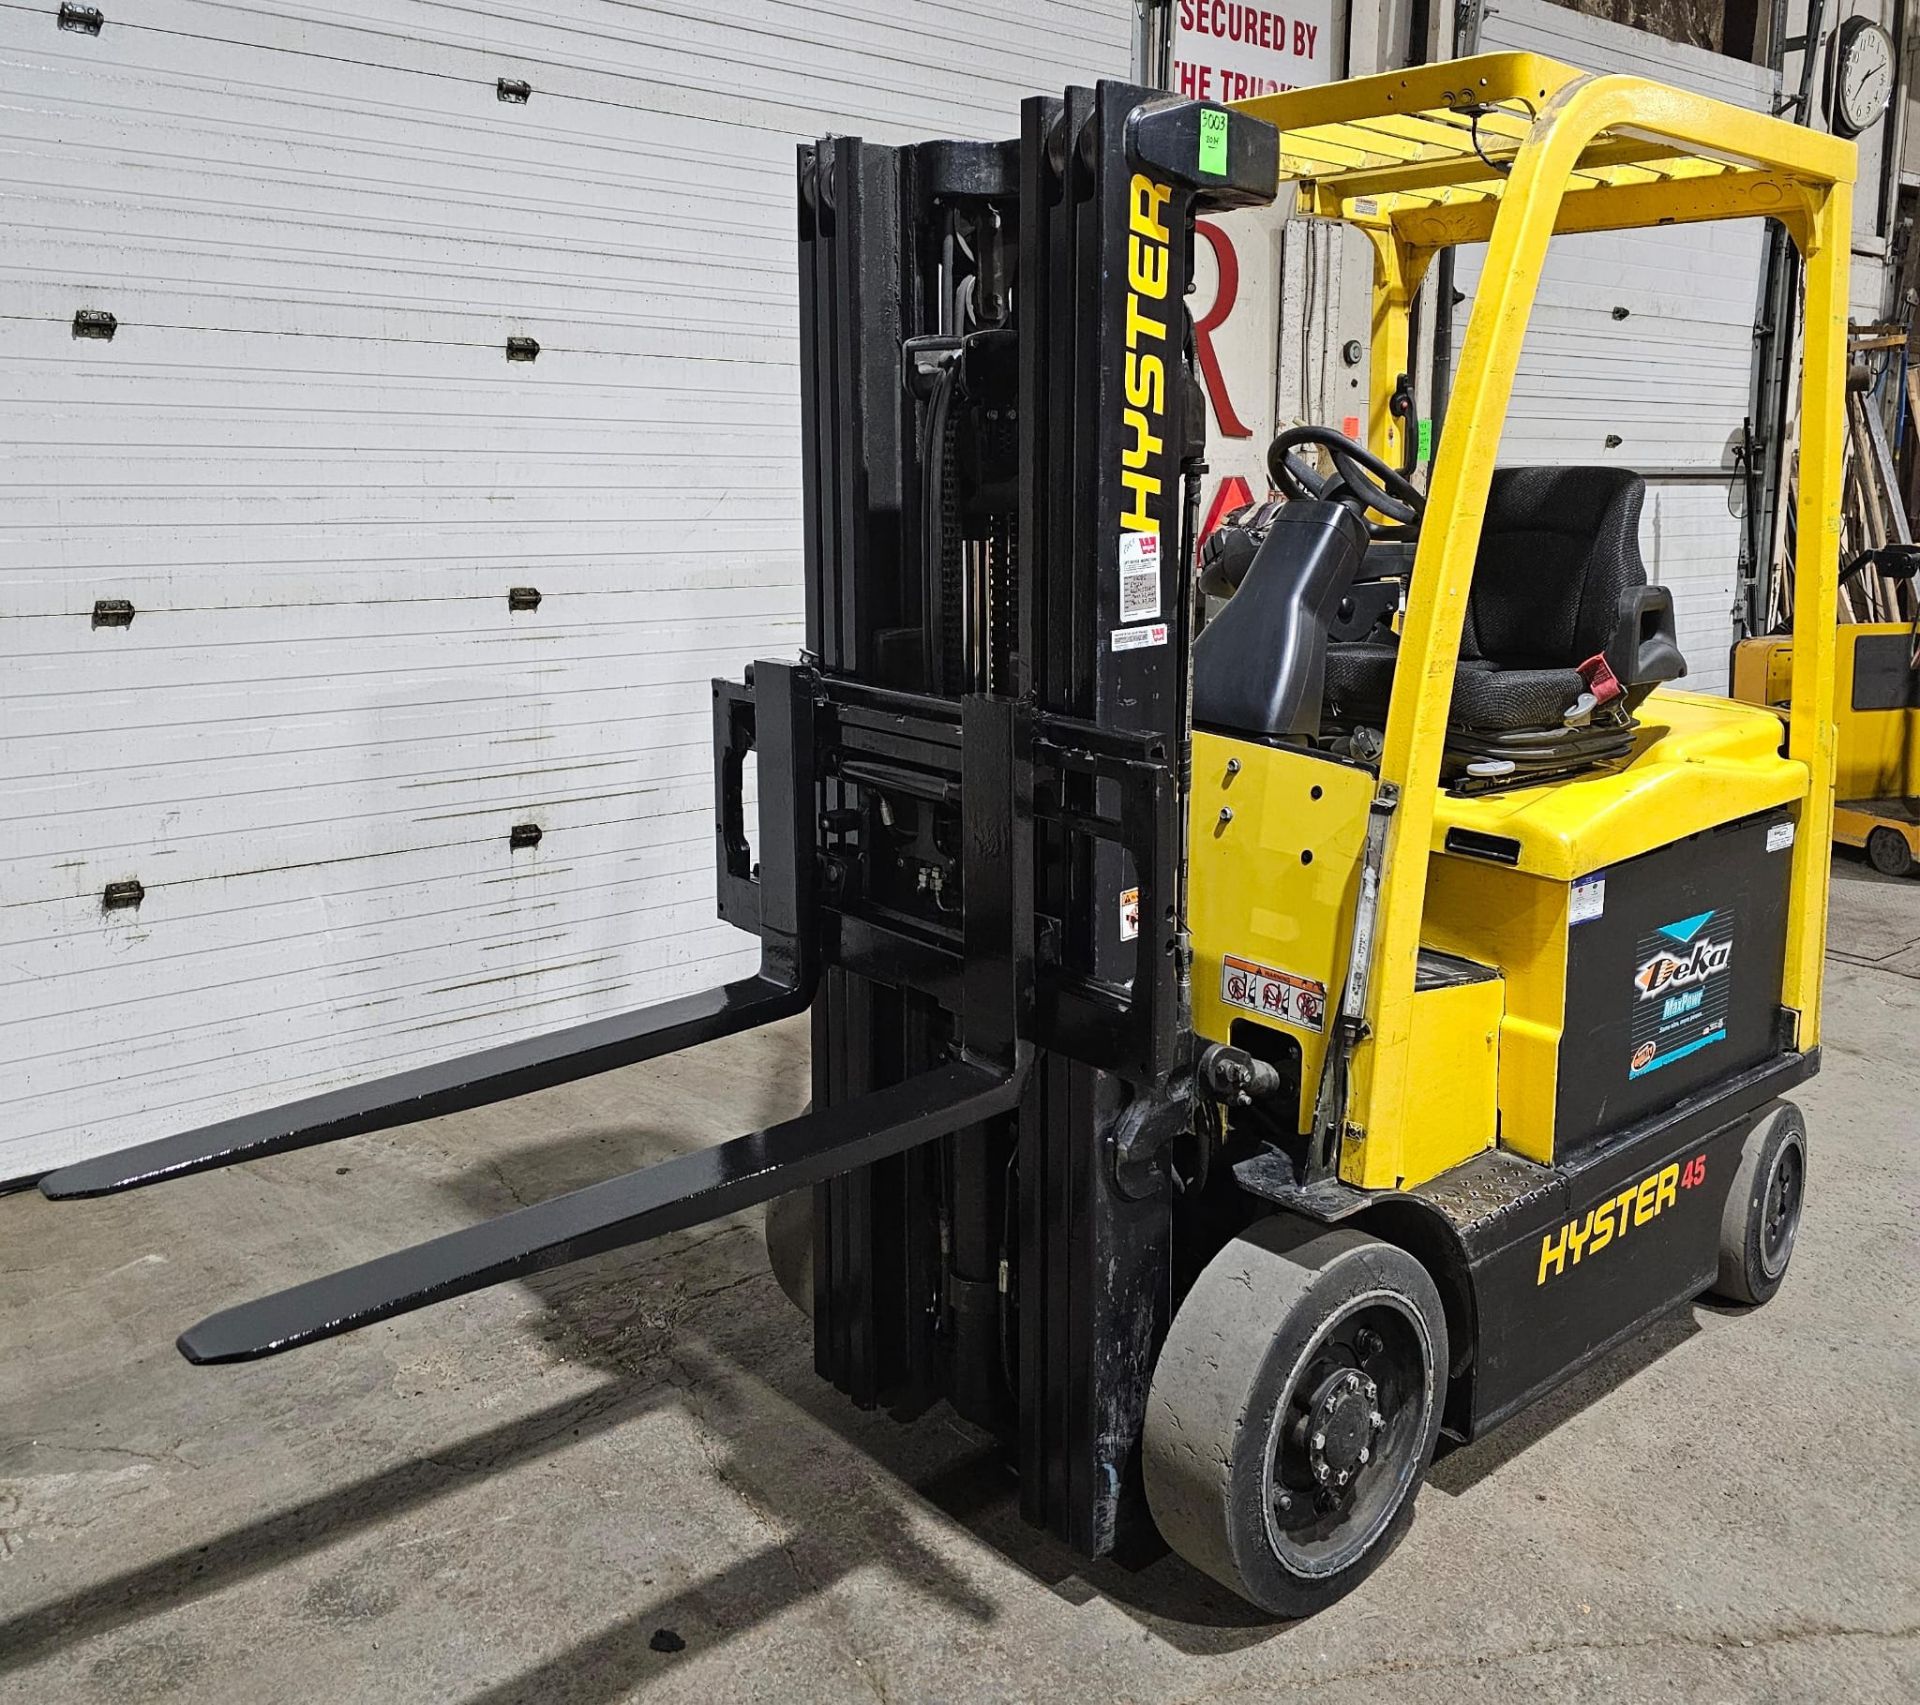 2014 Hyster 4,500lbs Capacity Forklift Electric 48V with sideshift & 4 functions & 3-STAGE MAST 189" - Image 4 of 6